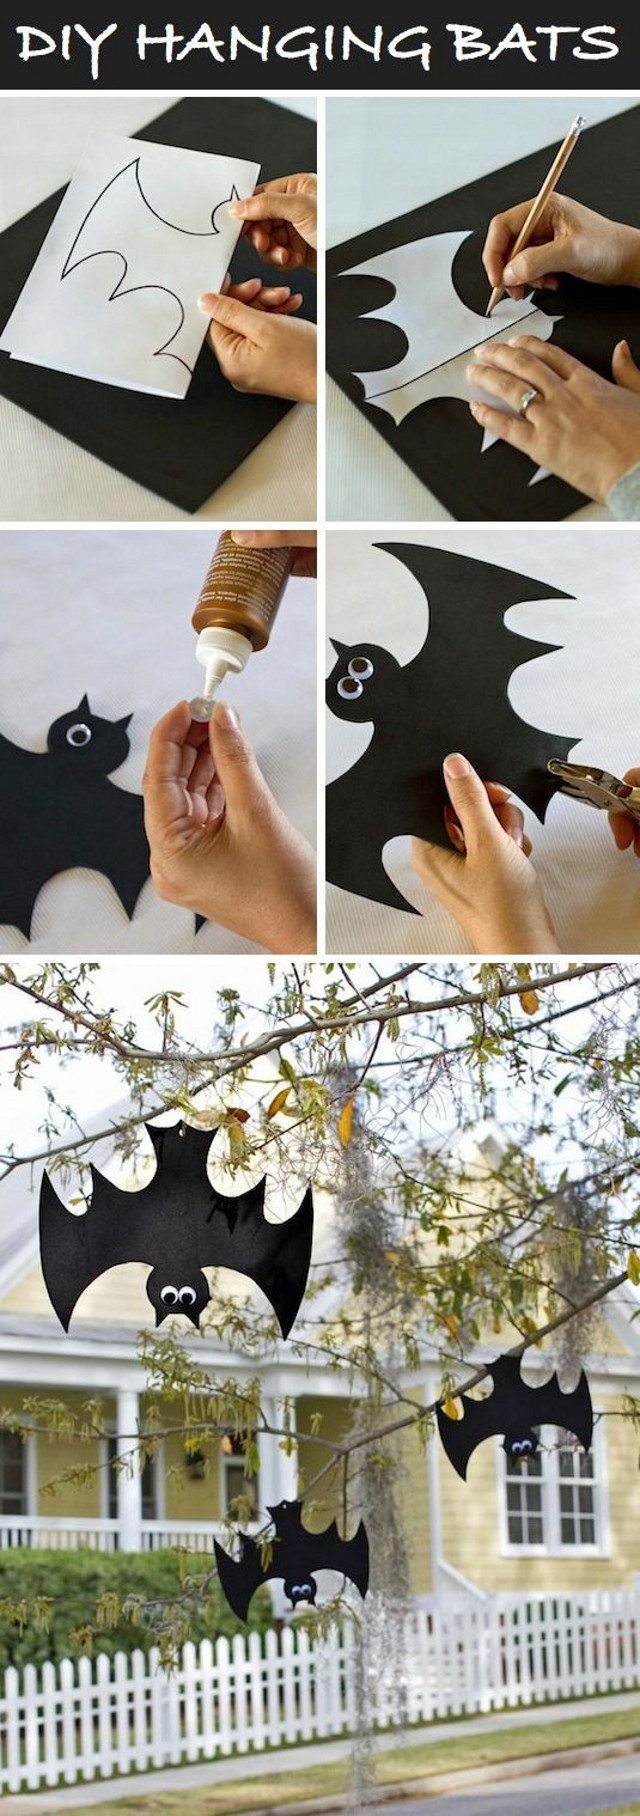 16-Easy-But-Awesome-Homemade-Halloween-Decorations-hanging-bats